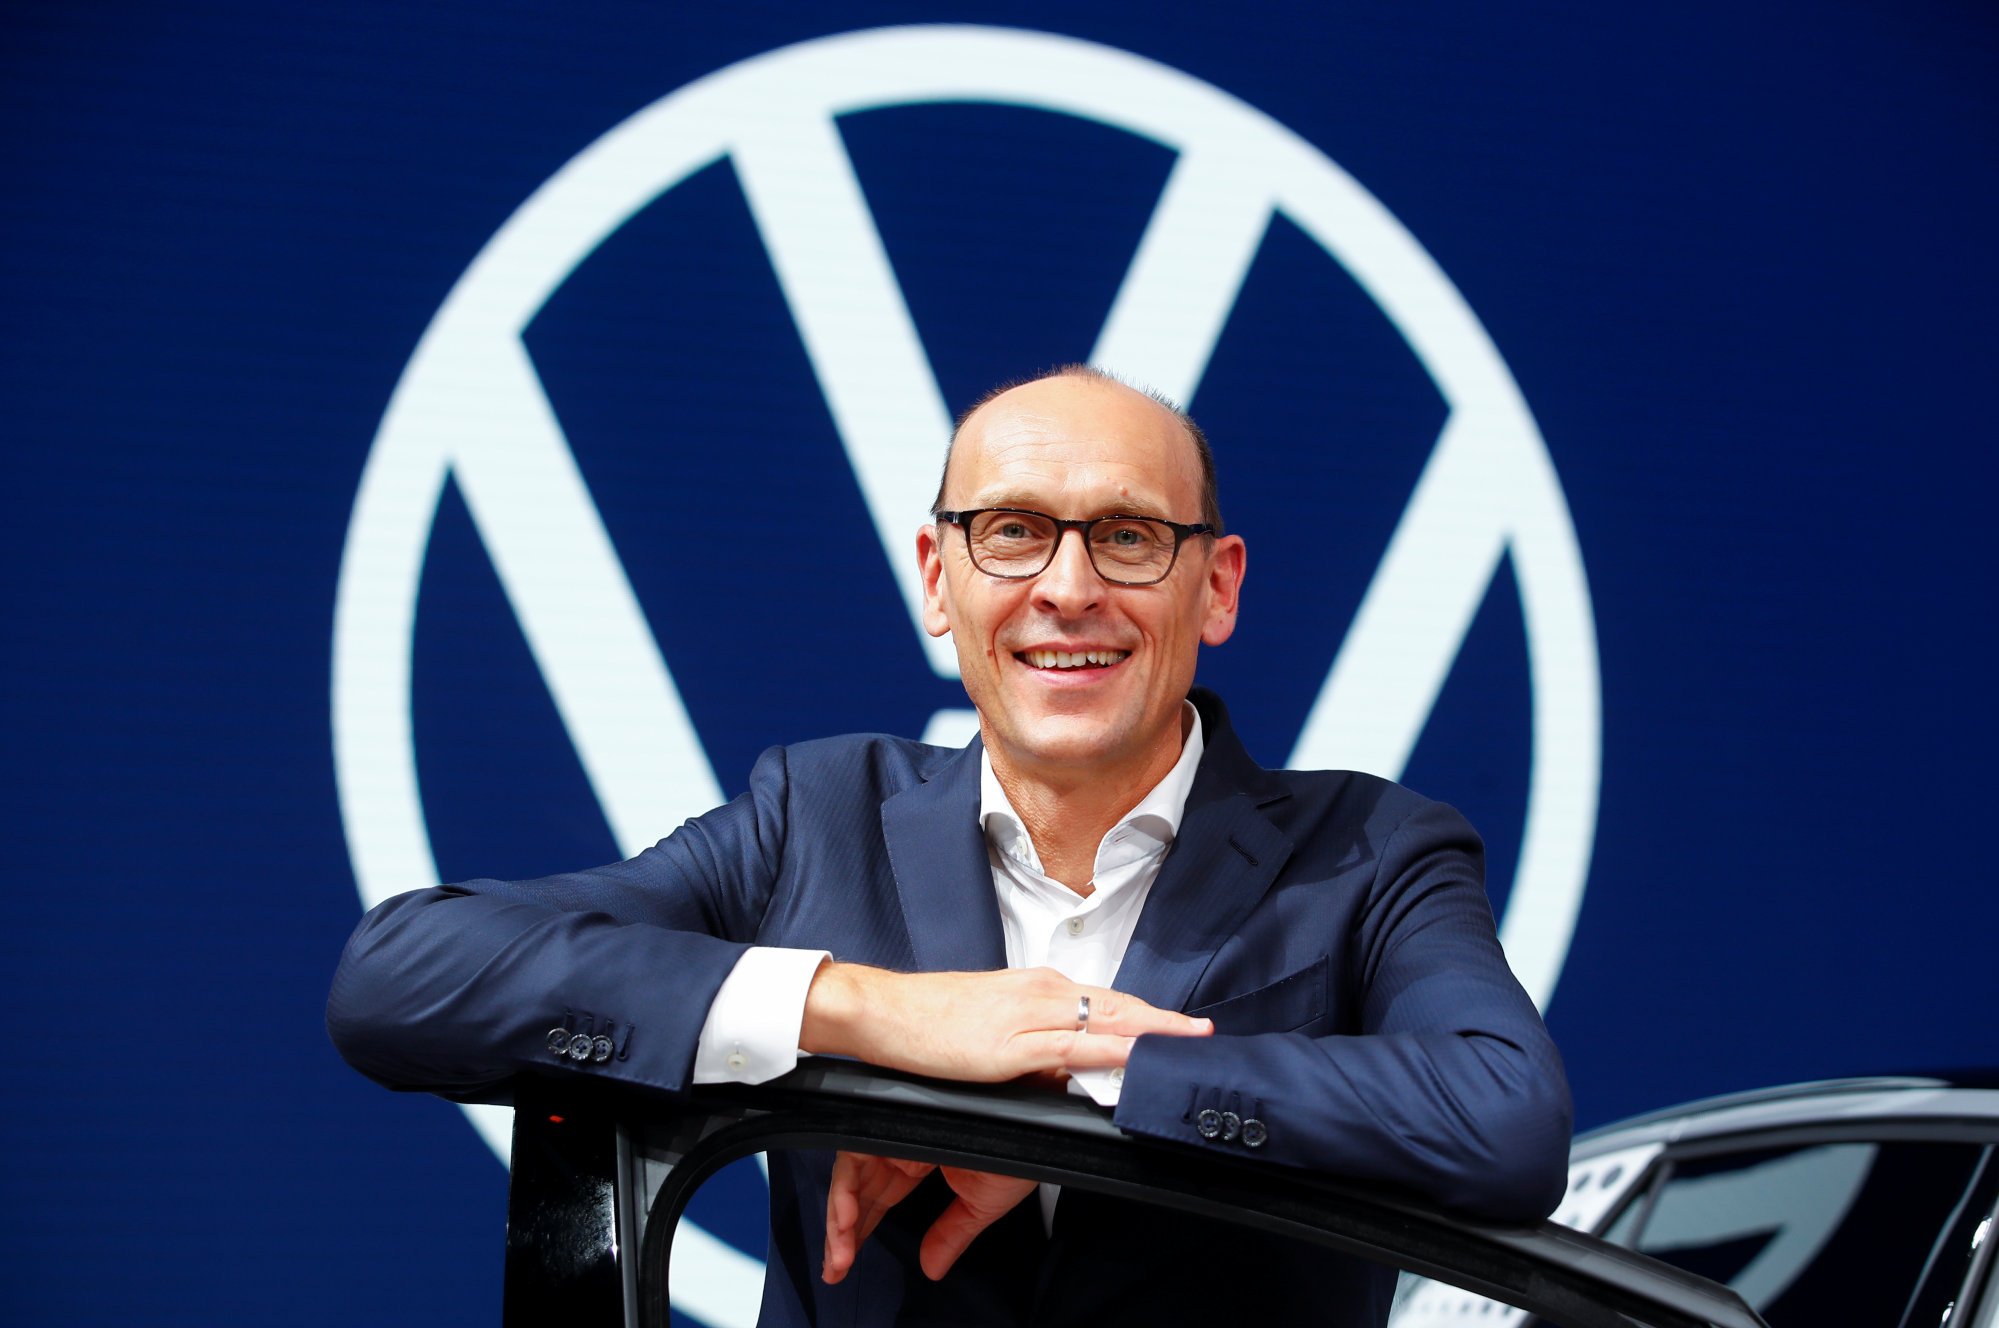 Volkswagen CEO Expects September Delivery Growth to Continue